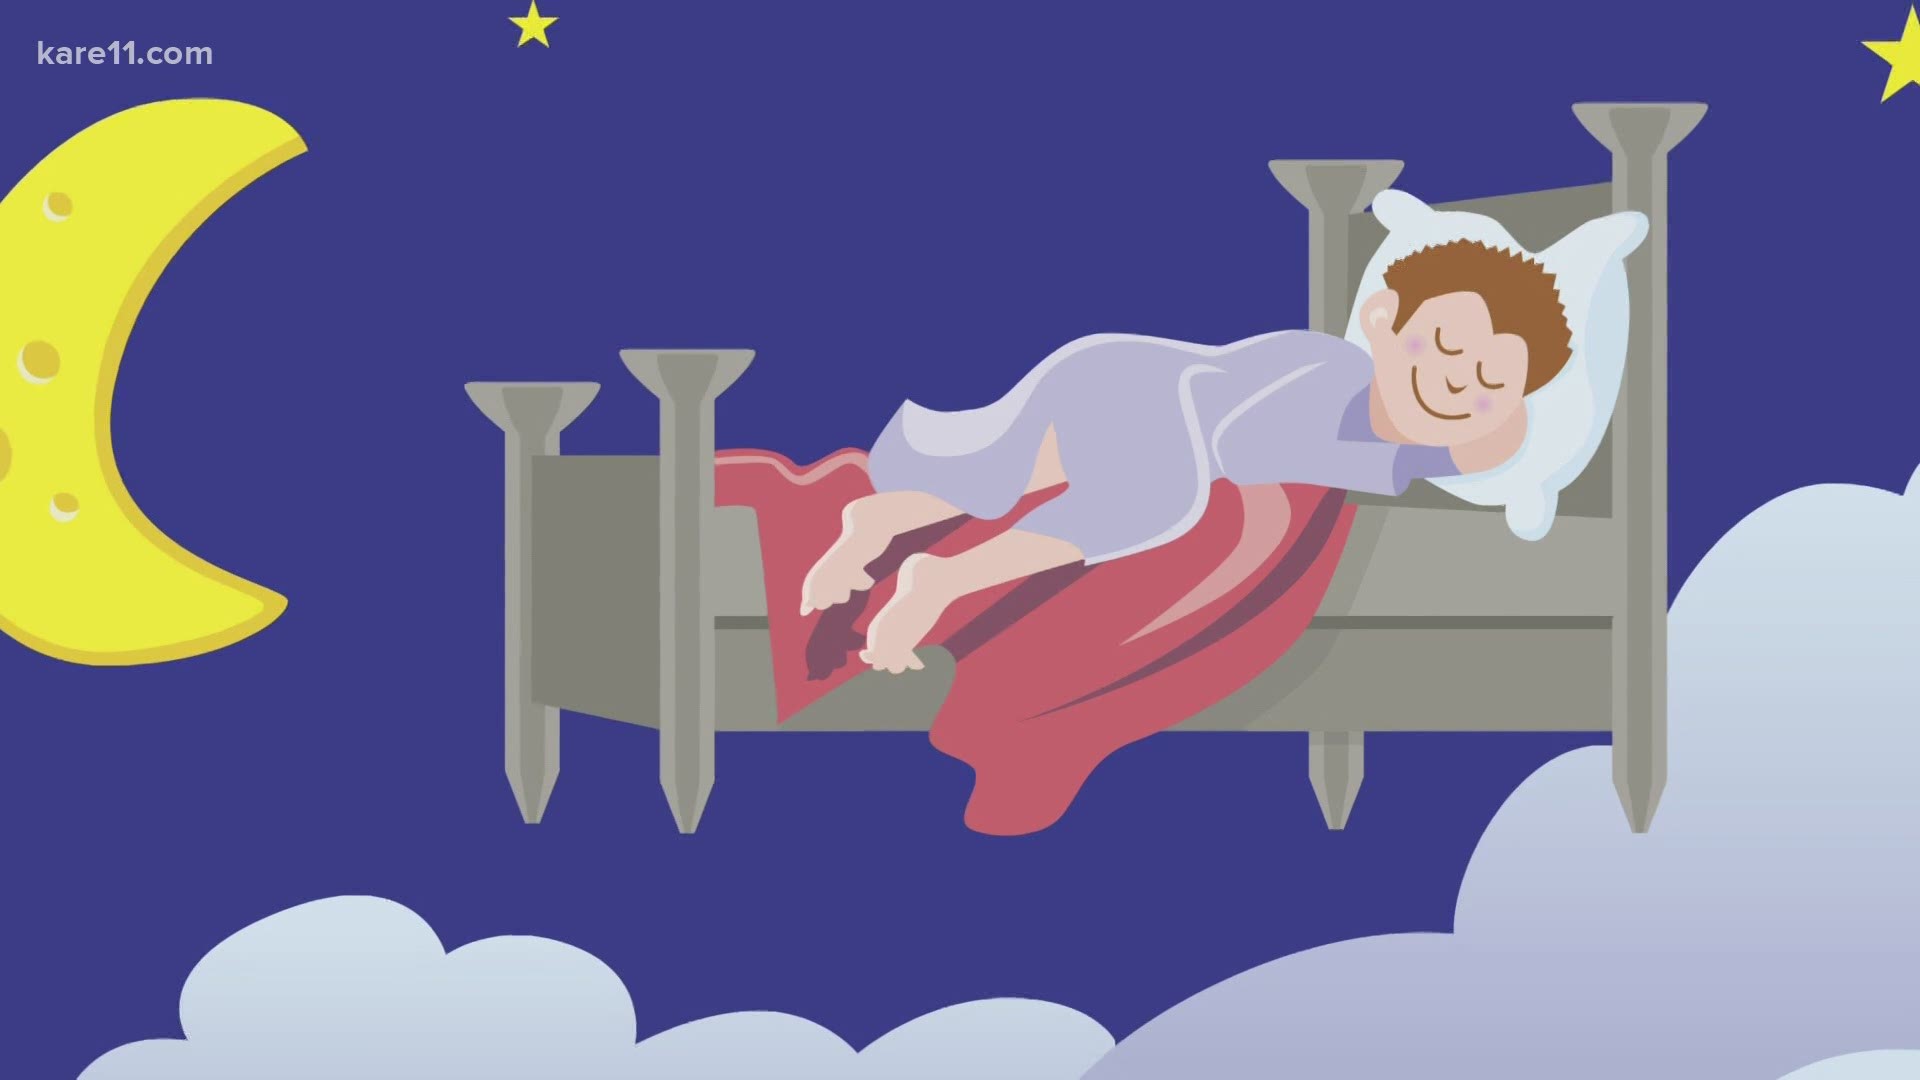 A Minneapolis-based organization is making sure dreams come true for children who are having a hard time getting a good night's sleep.